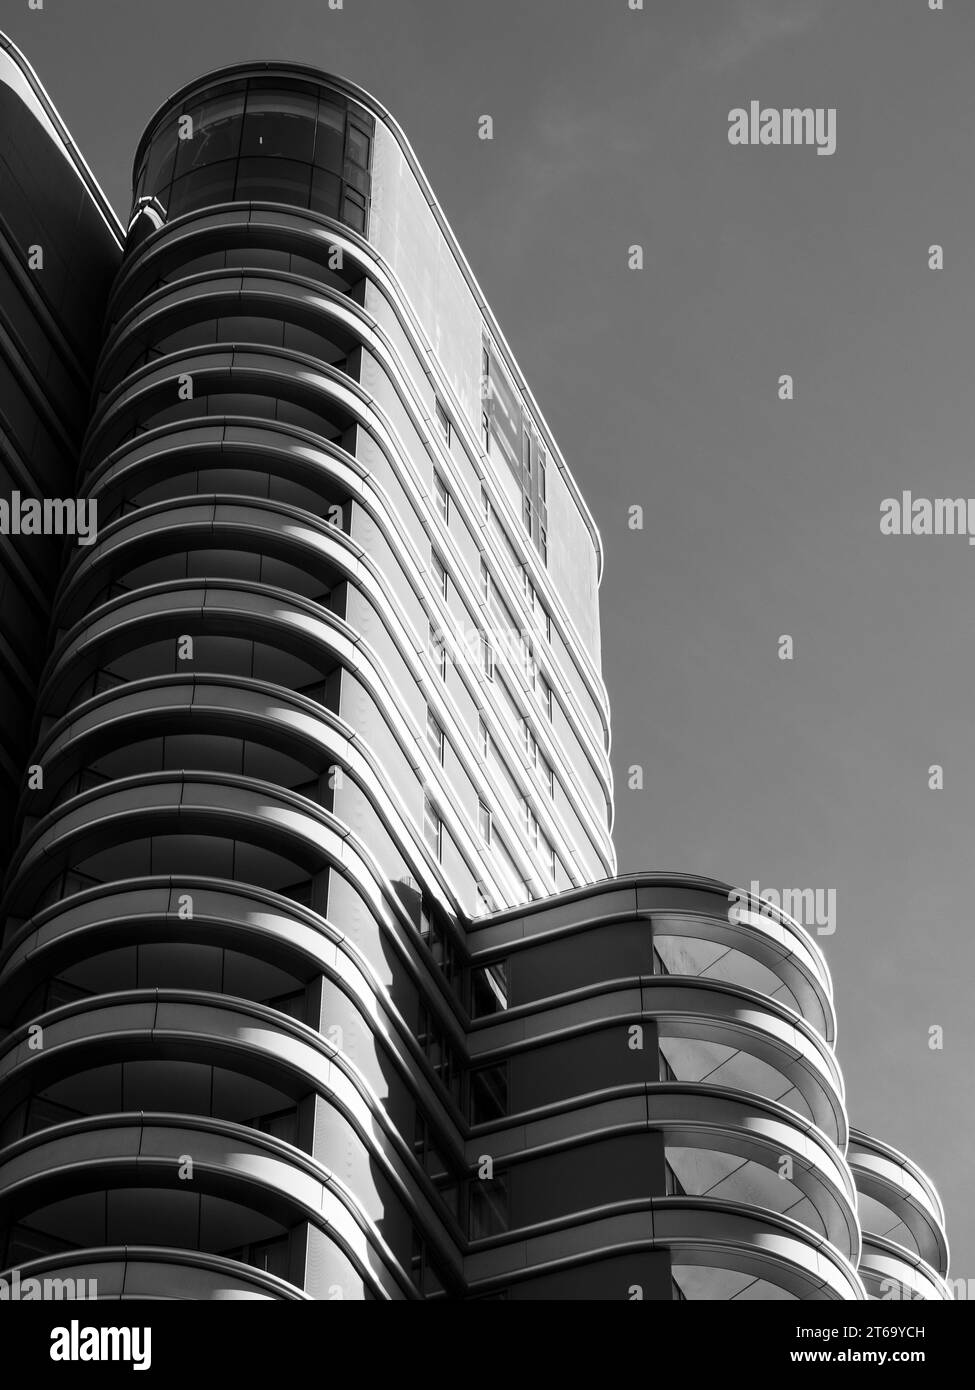 The Corniche, Mixed Use Development, Albert Embankment, South London, Londres, Angleterre, Royaume-Uni, GB. Banque D'Images